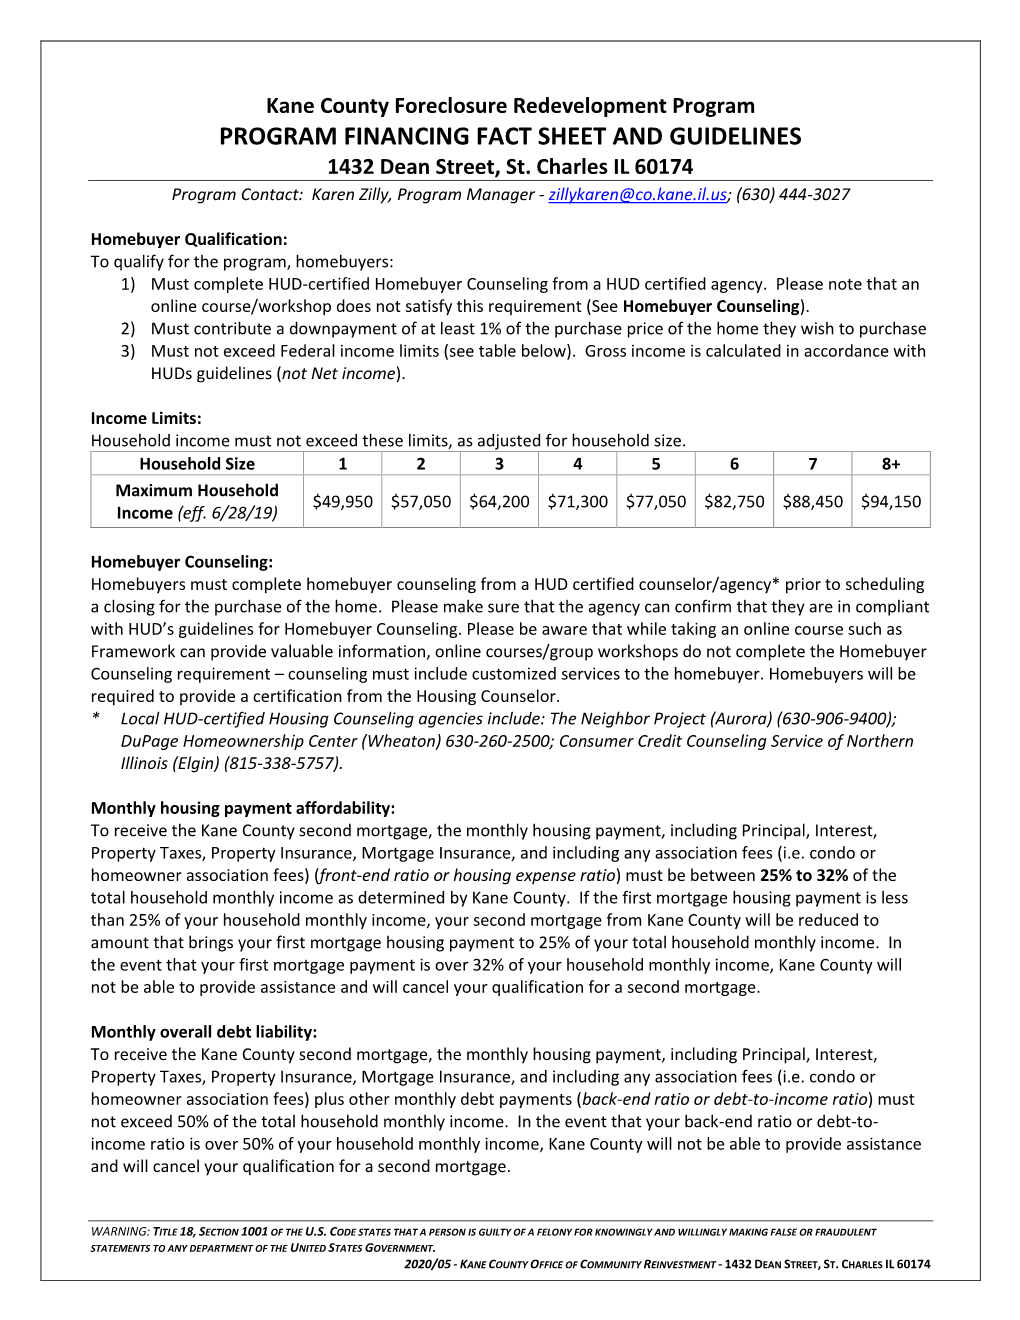 Fact Sheet, Income Limits and Program Guidelines